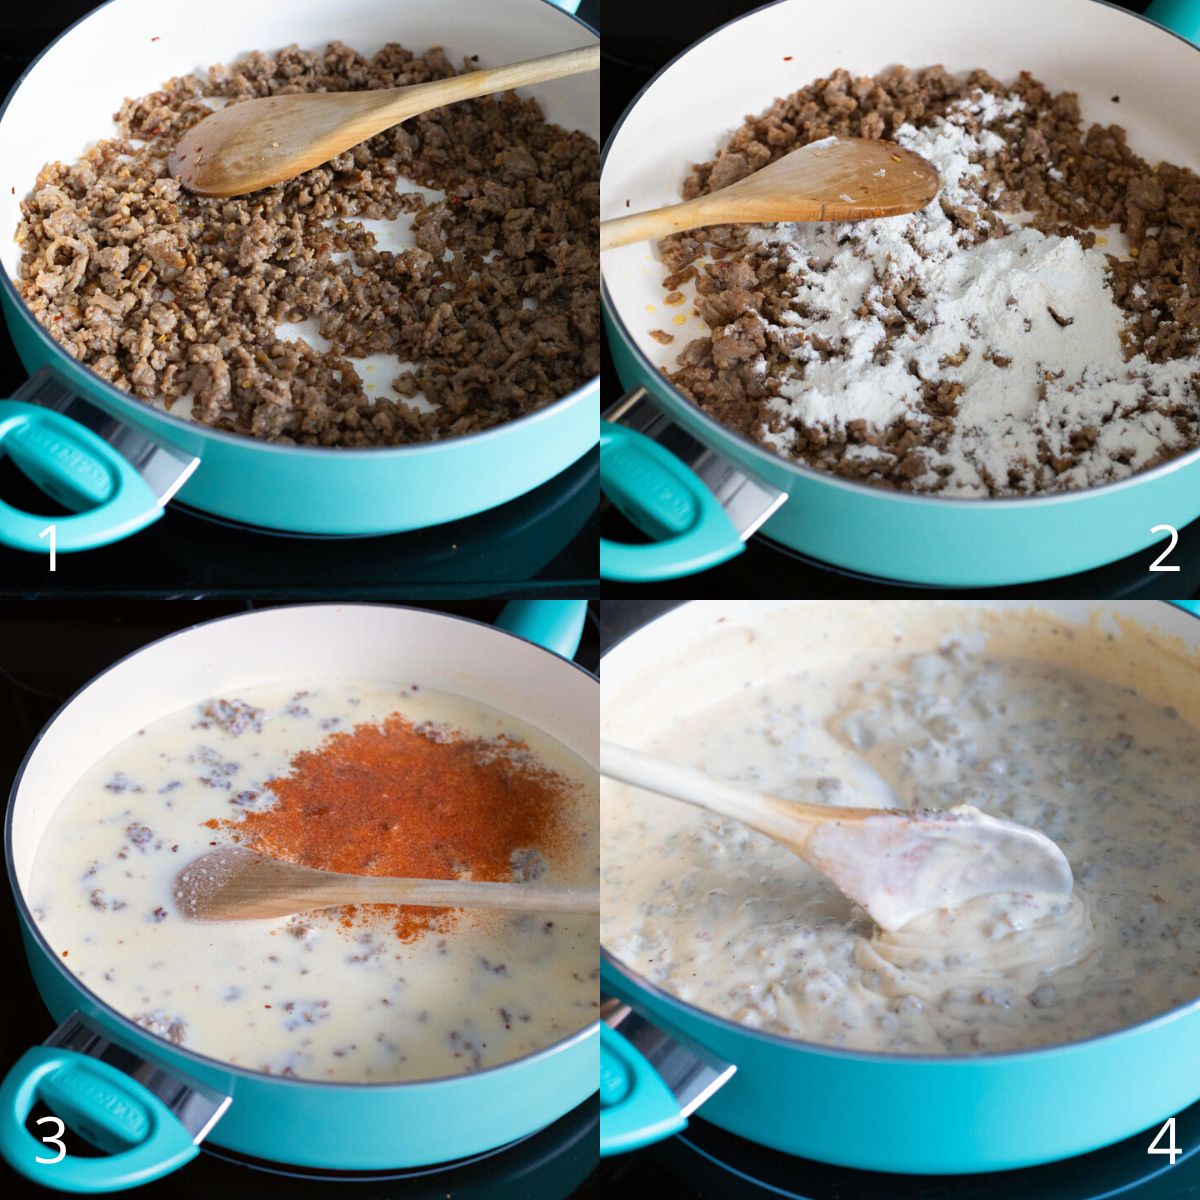 The step by step photos show how to make sausage gravy in a skillet.